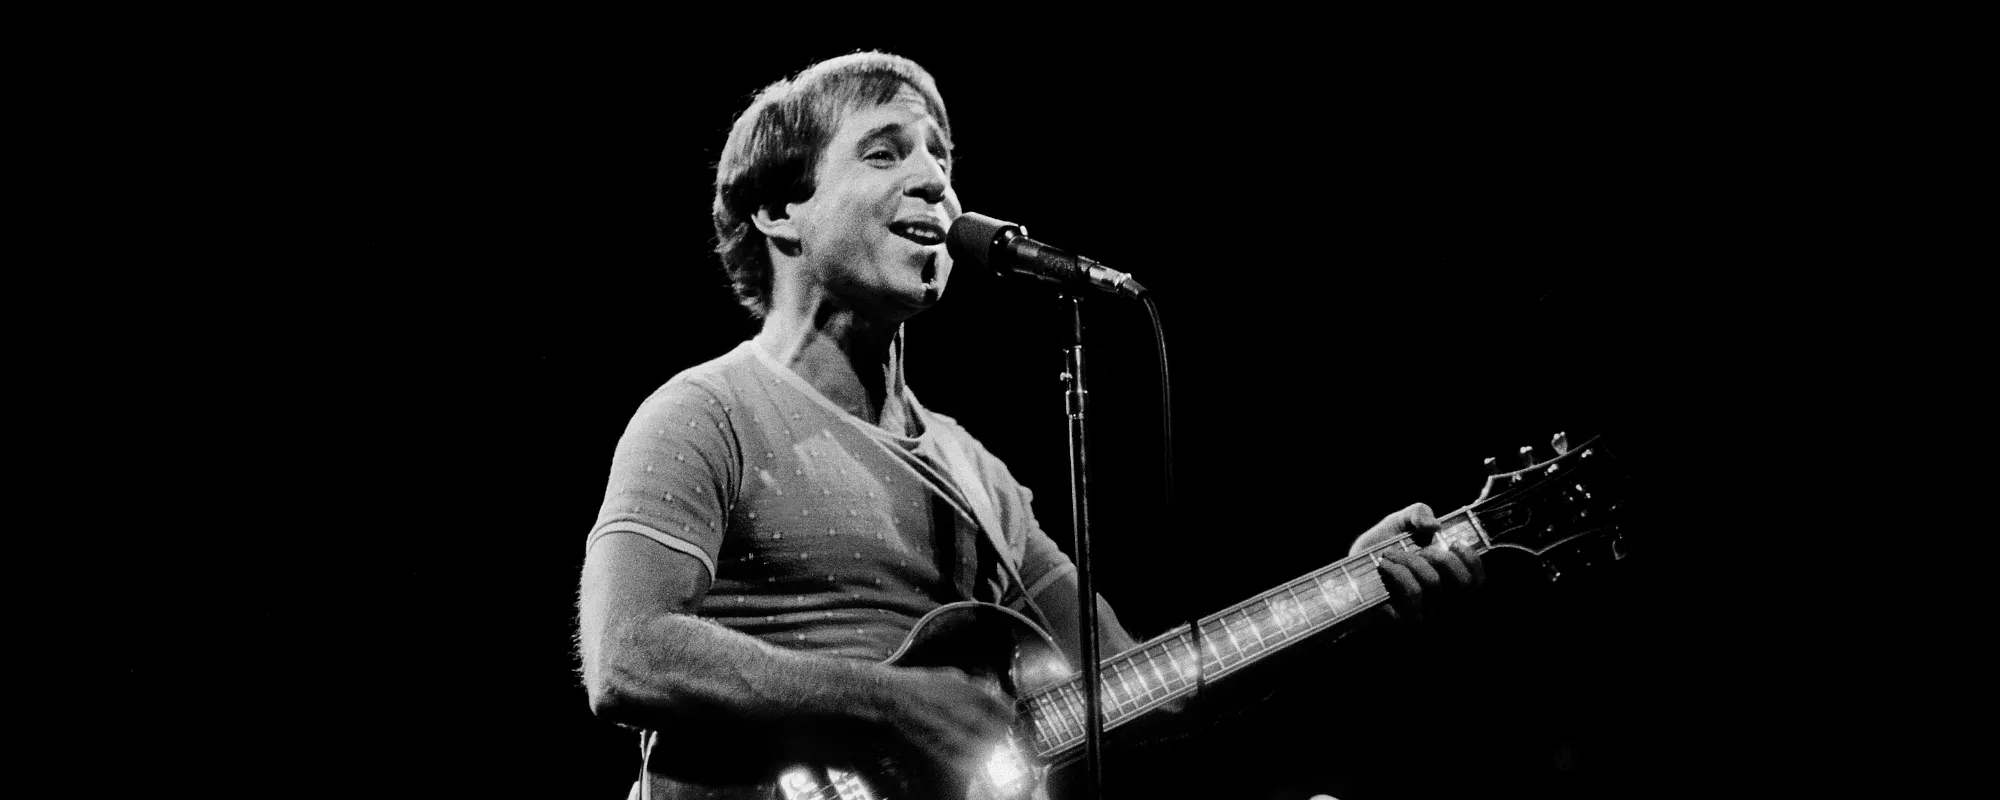 The Meaning Behind Paul Simon’s “Graceland”